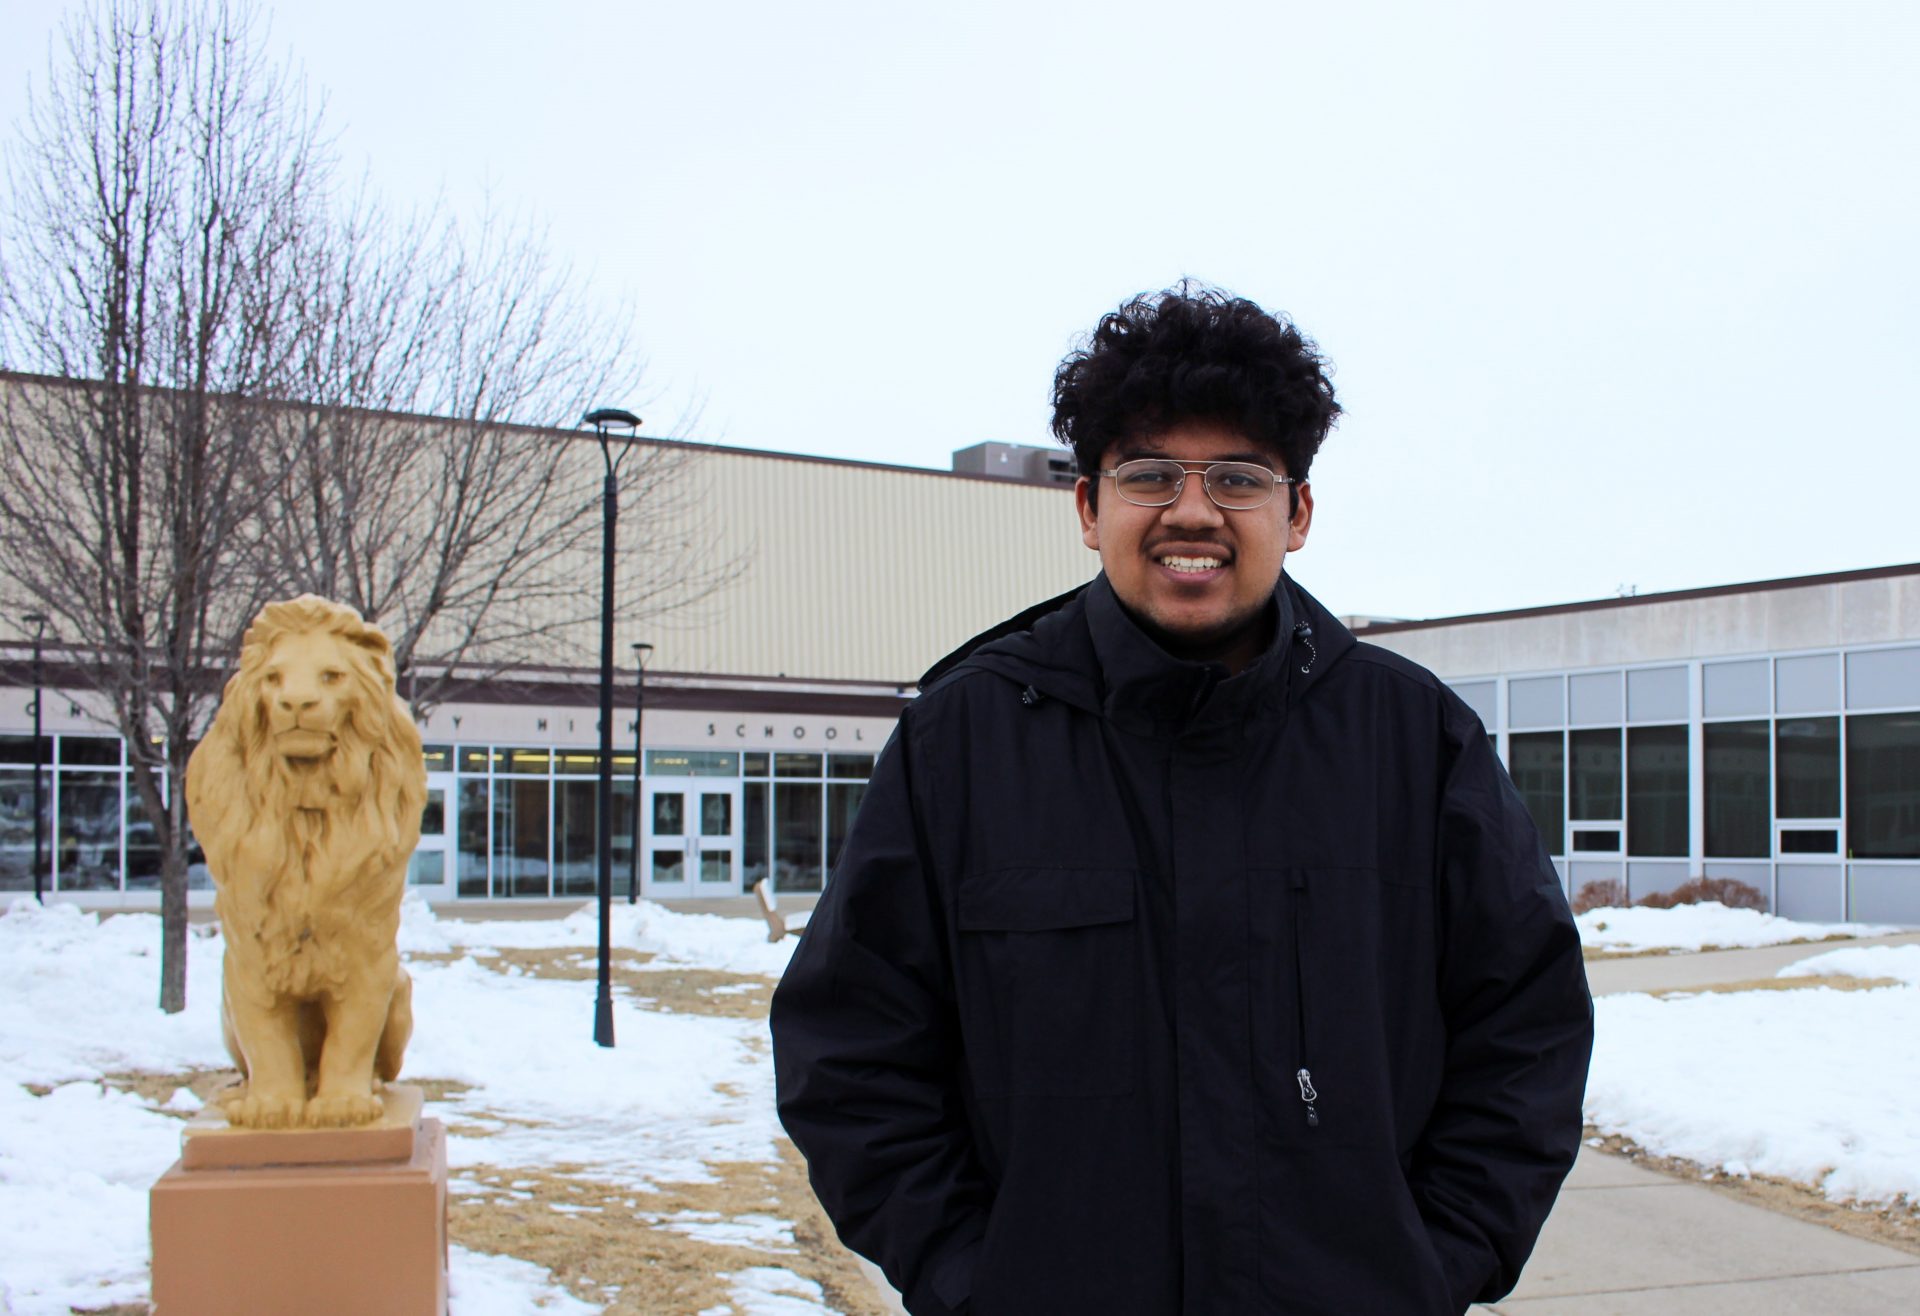 Chris Espino says he can see a future in Denison. But he wants to see more interaction between the diverse communities that make up the small town.